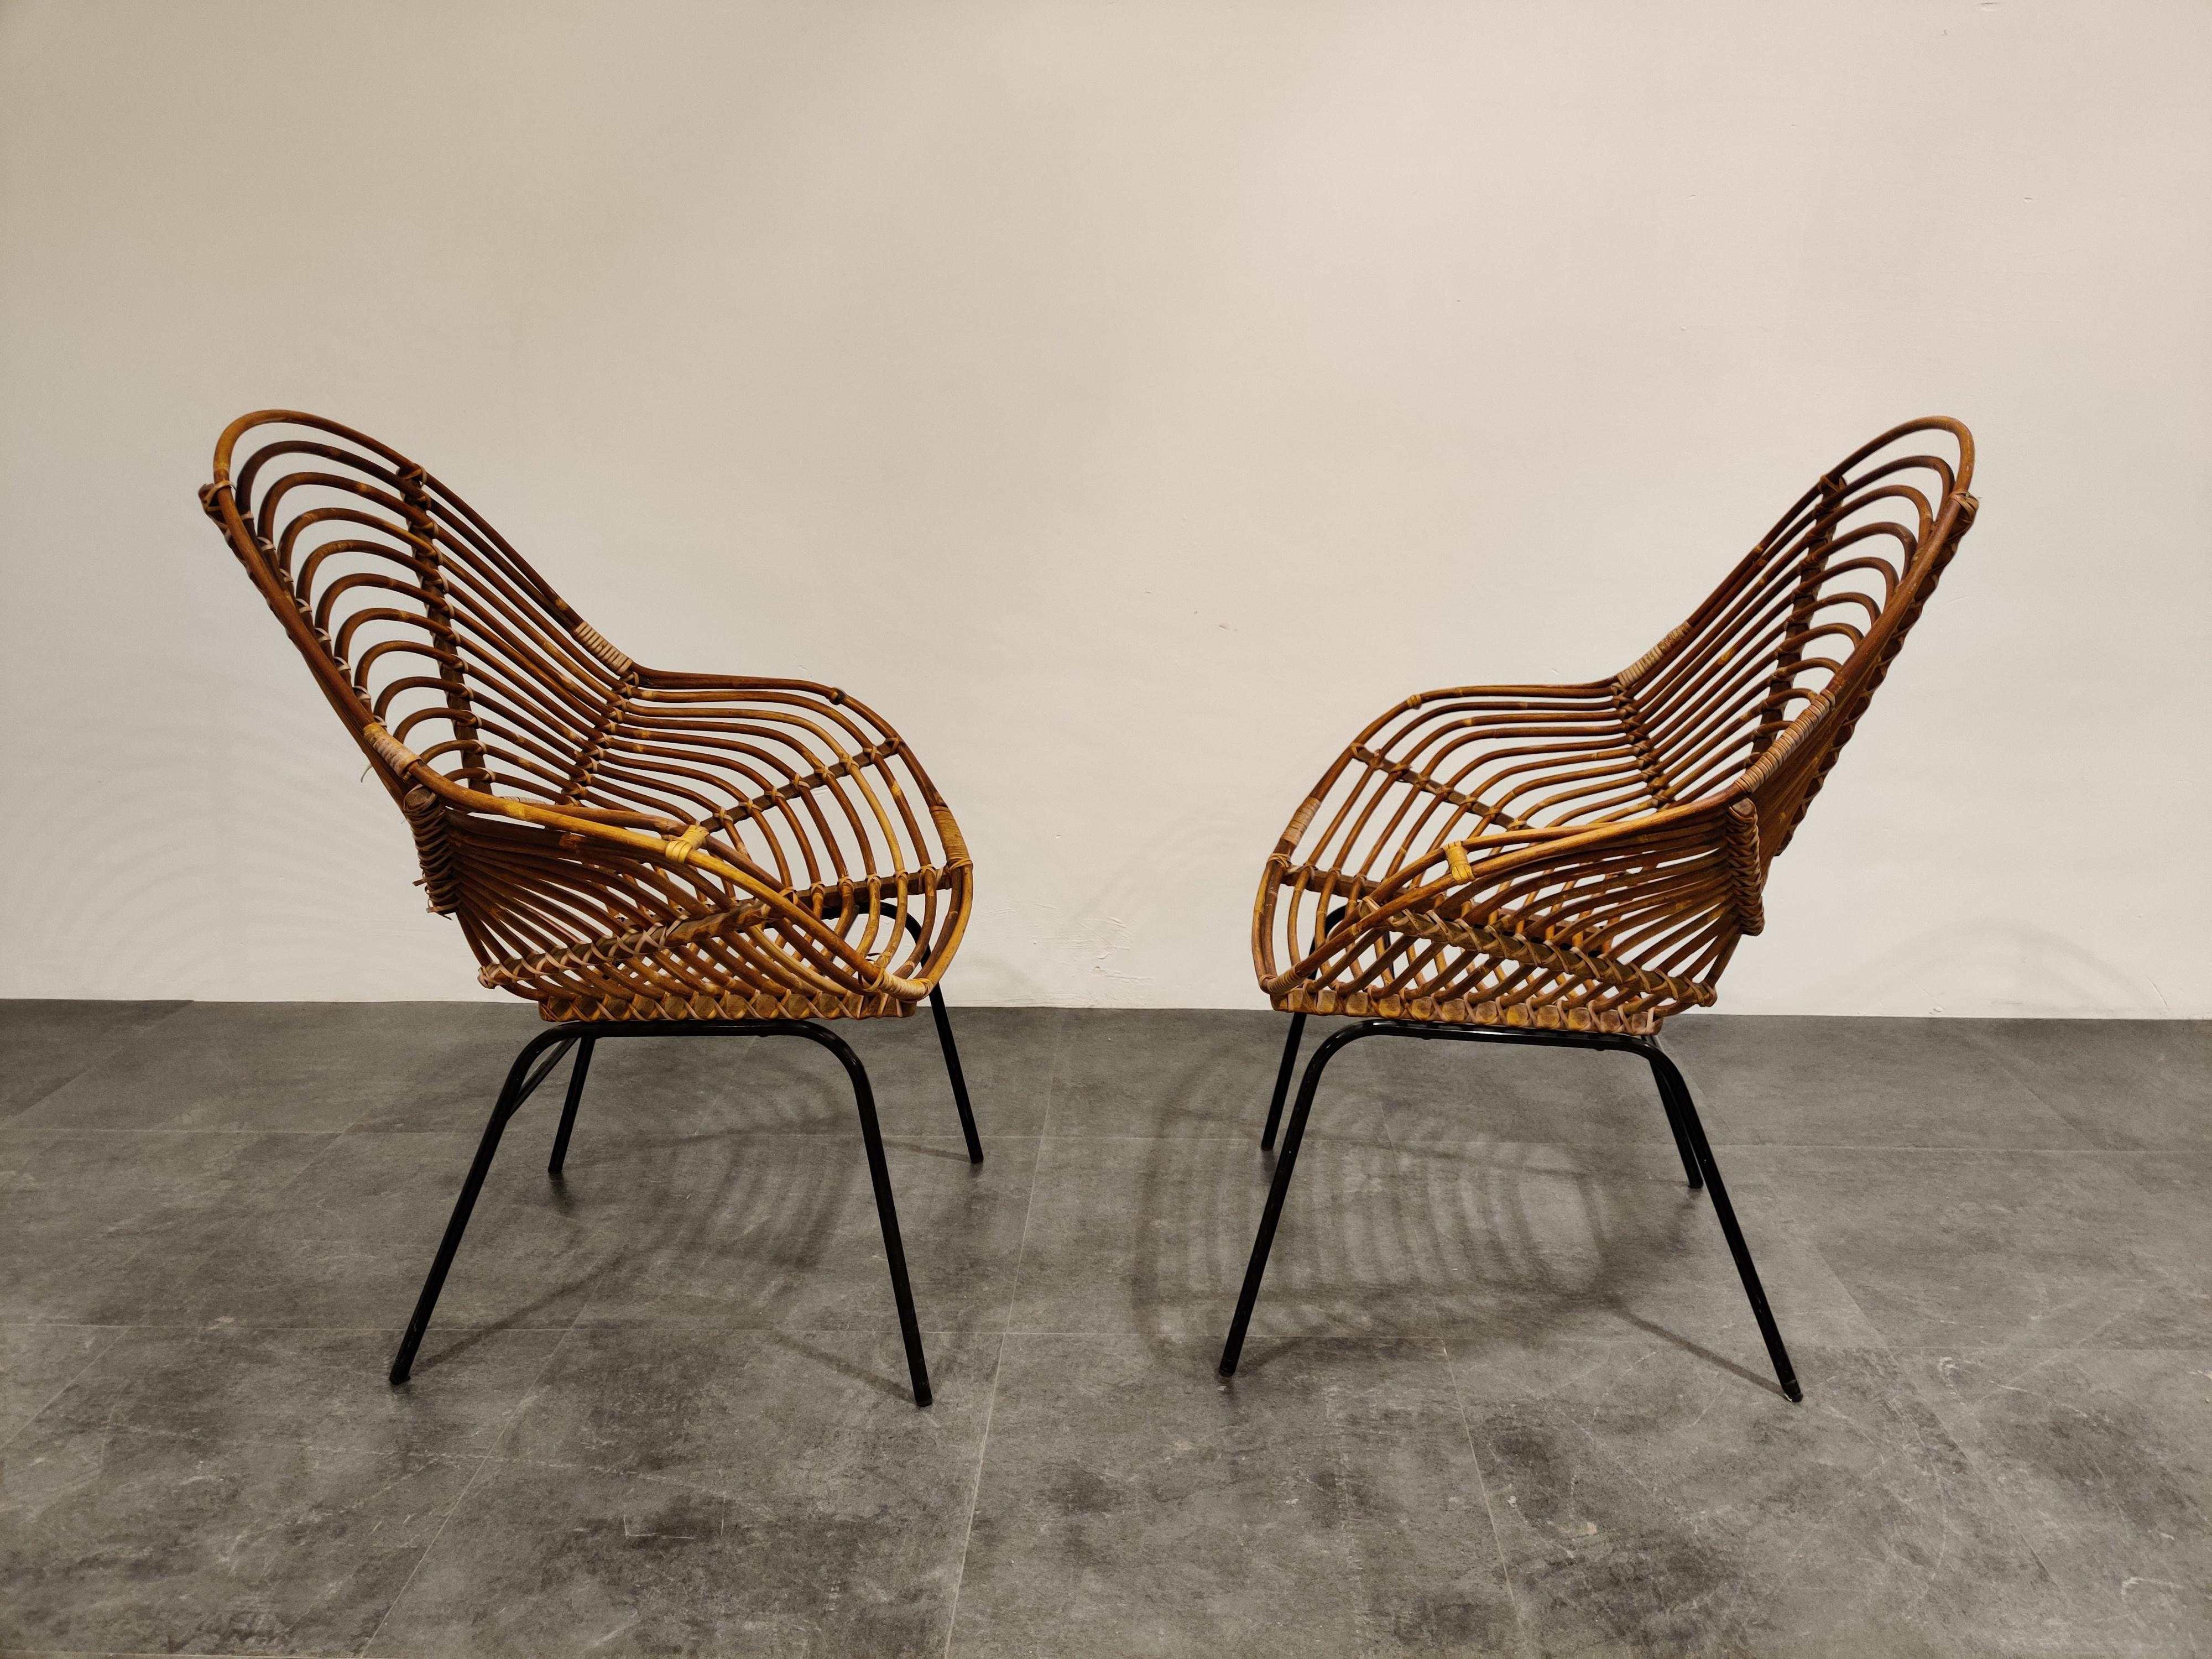 pair of rattan chairs